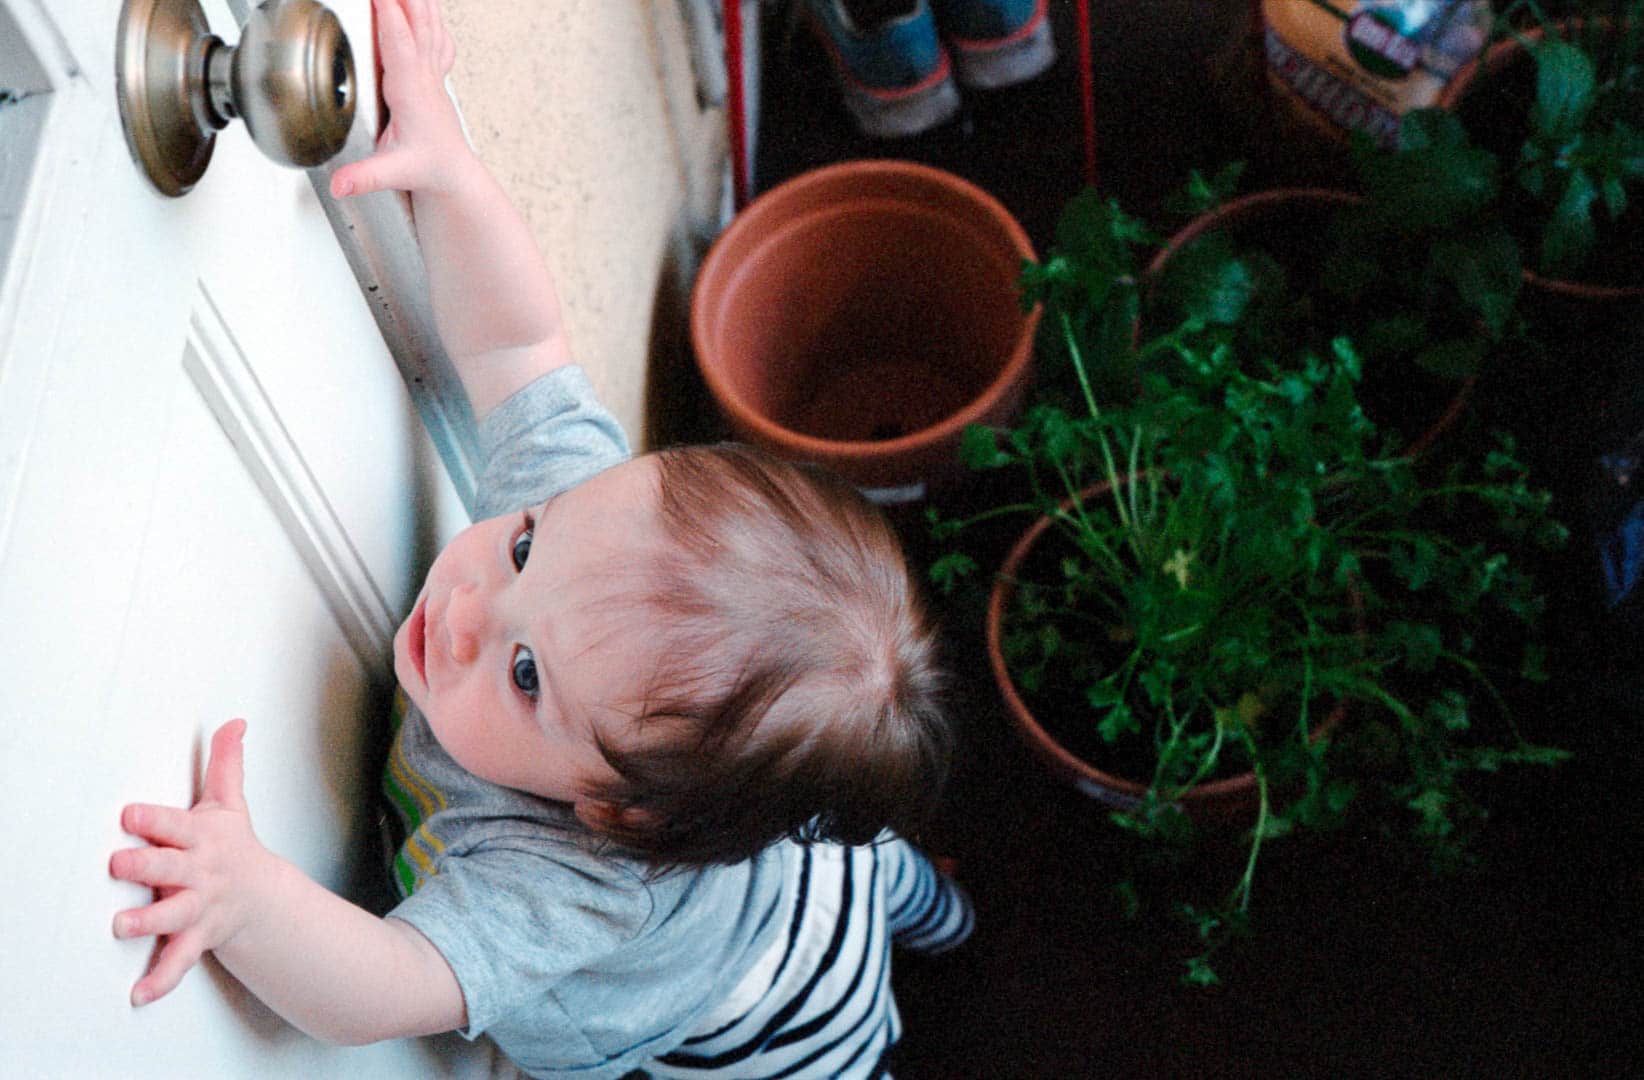 A baby standing up reaching for a door knob